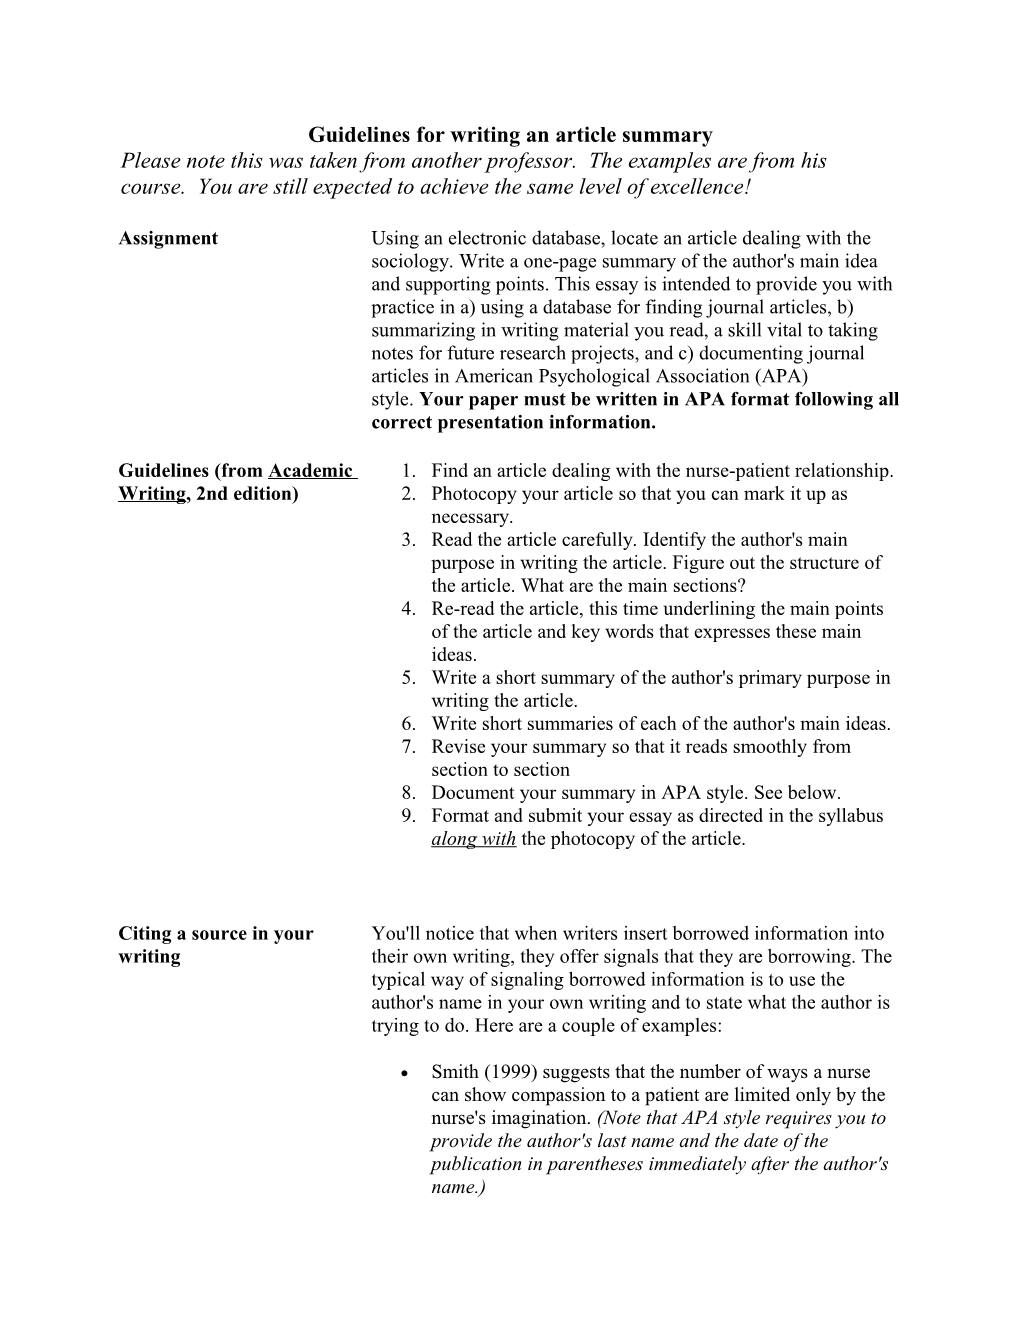 Guidelines for Writing an Article Summary